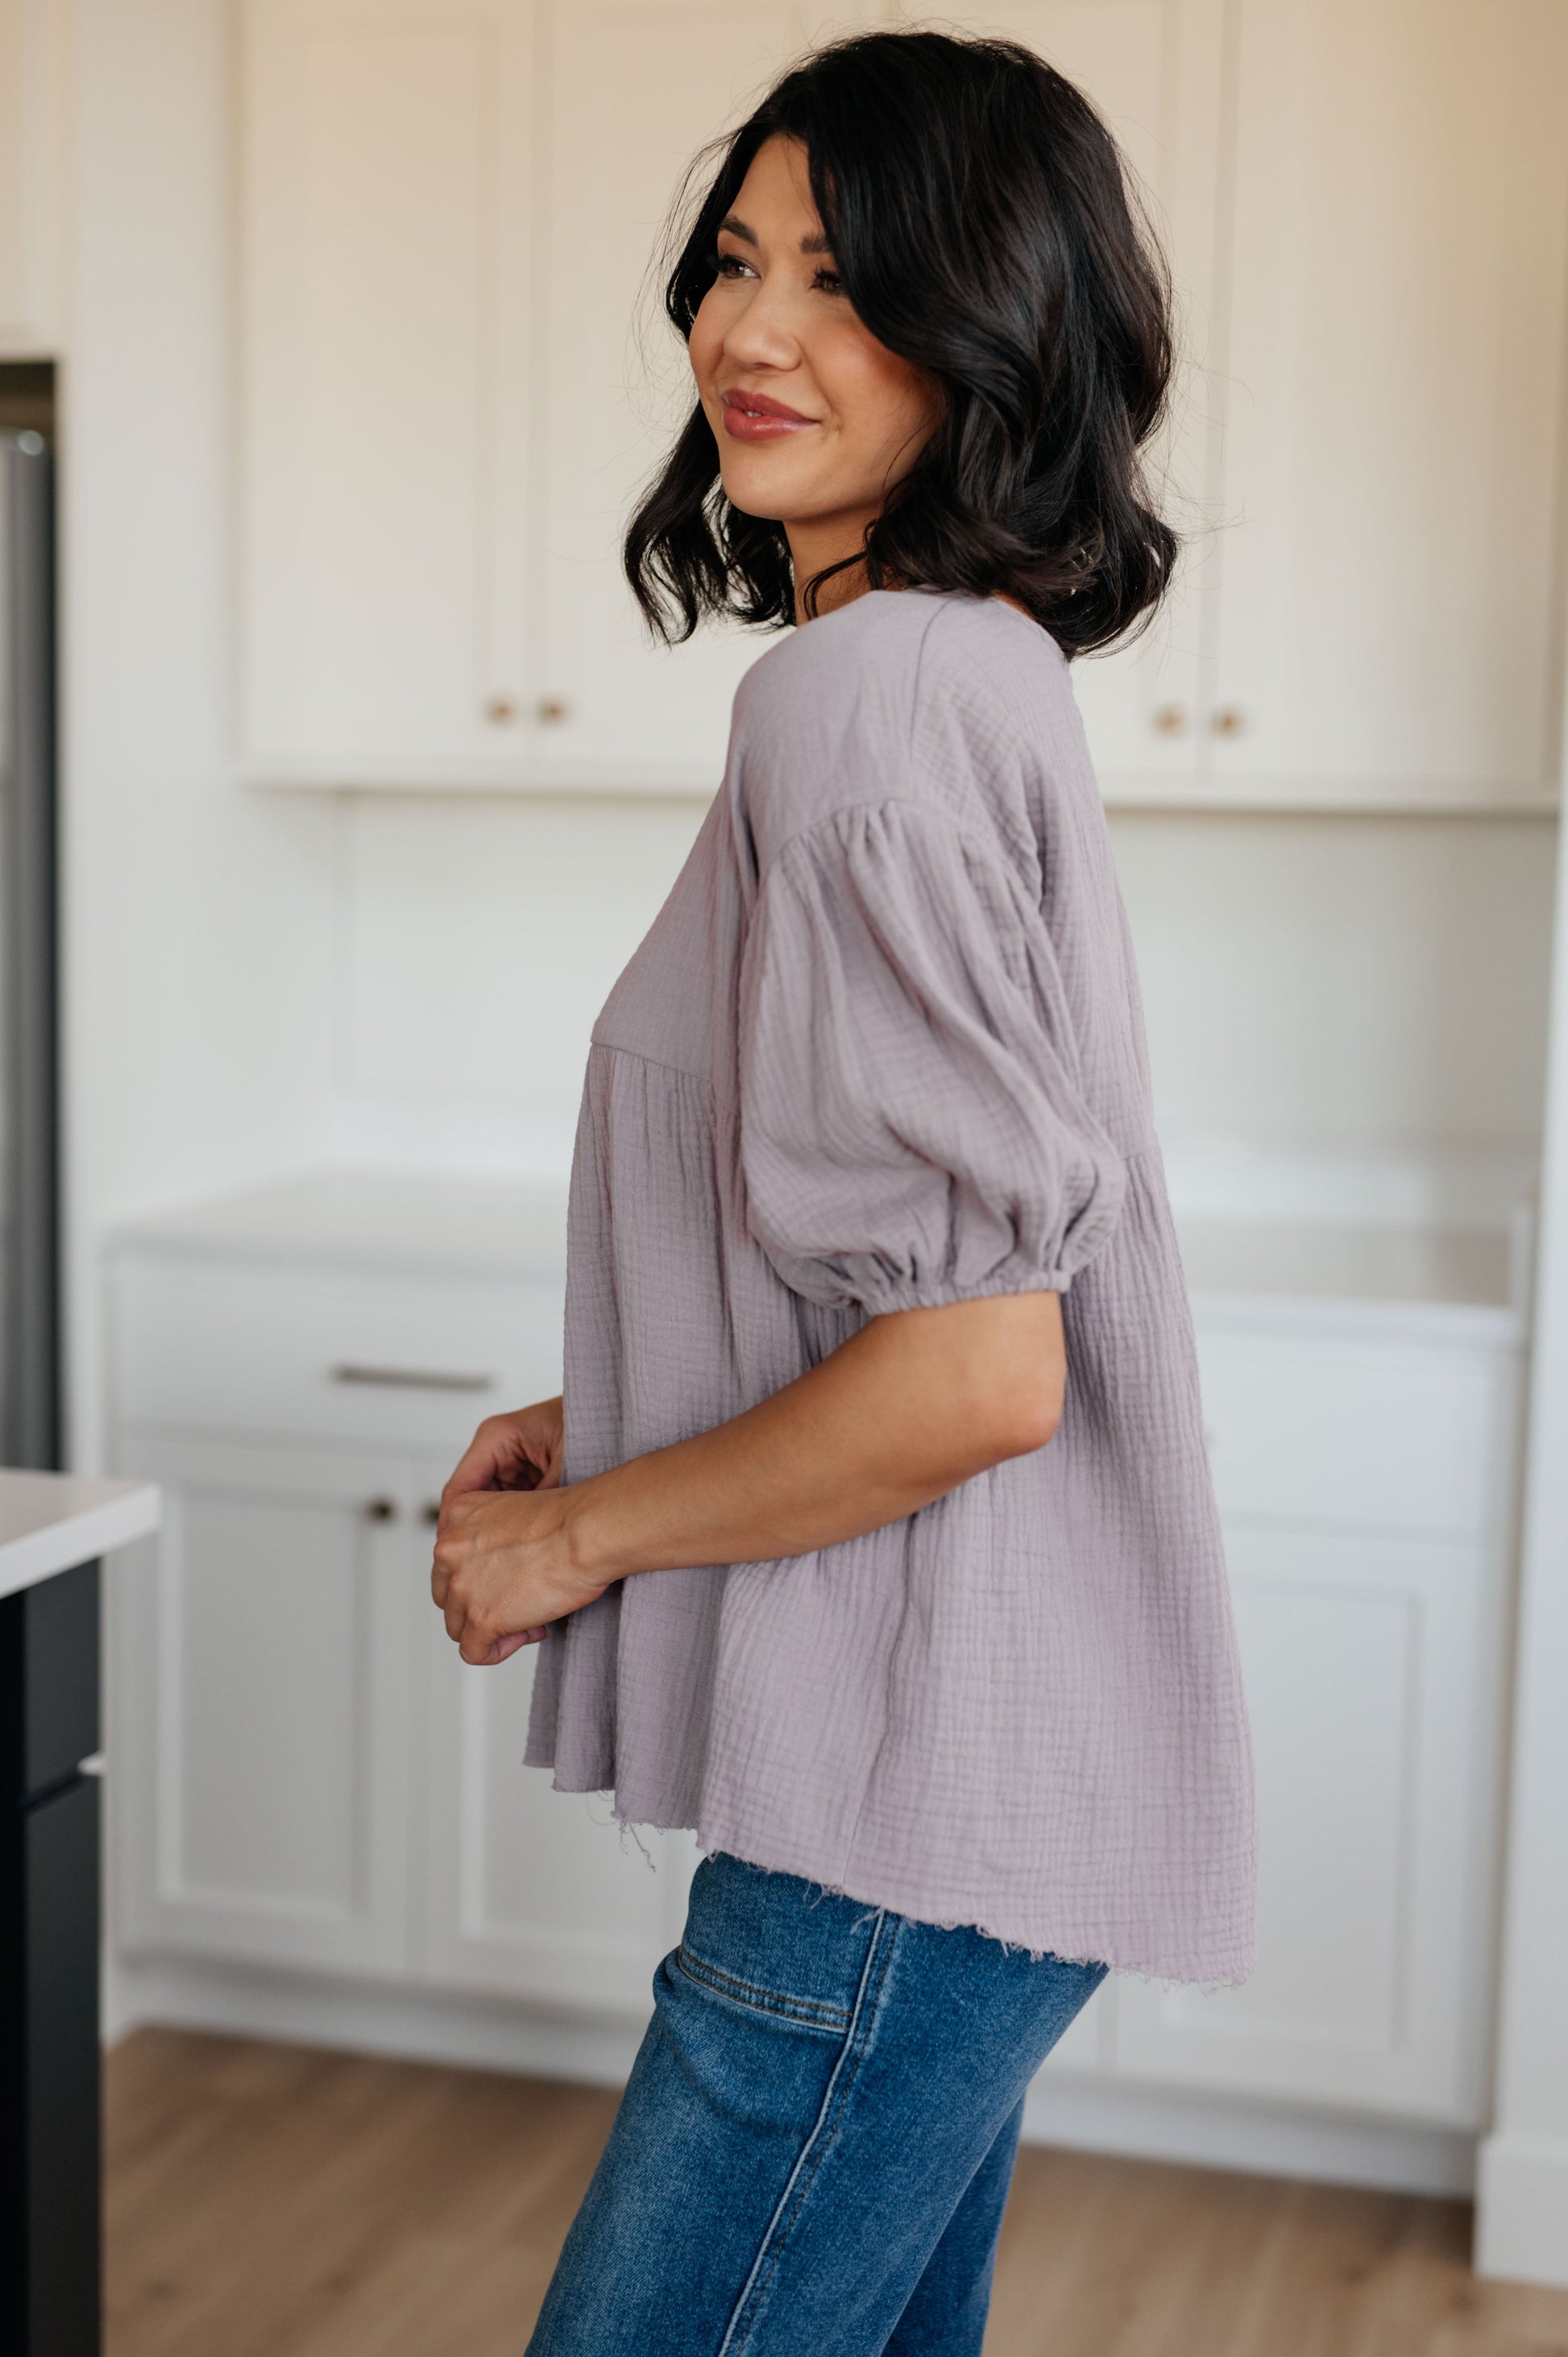 This Pleasantly Perfect Peasant Blouse will instantly refresh your wardrobe with its modern and feminine touches. Crafted from the softest of cotton gauze, featuring a raw hem, balloon sleeves, babydoll cut, and a soft V-neckline, this blouse will keep you looking stylish and feeling comfortable all at once. Experience a clothing moment you won't want to miss! S - 3X